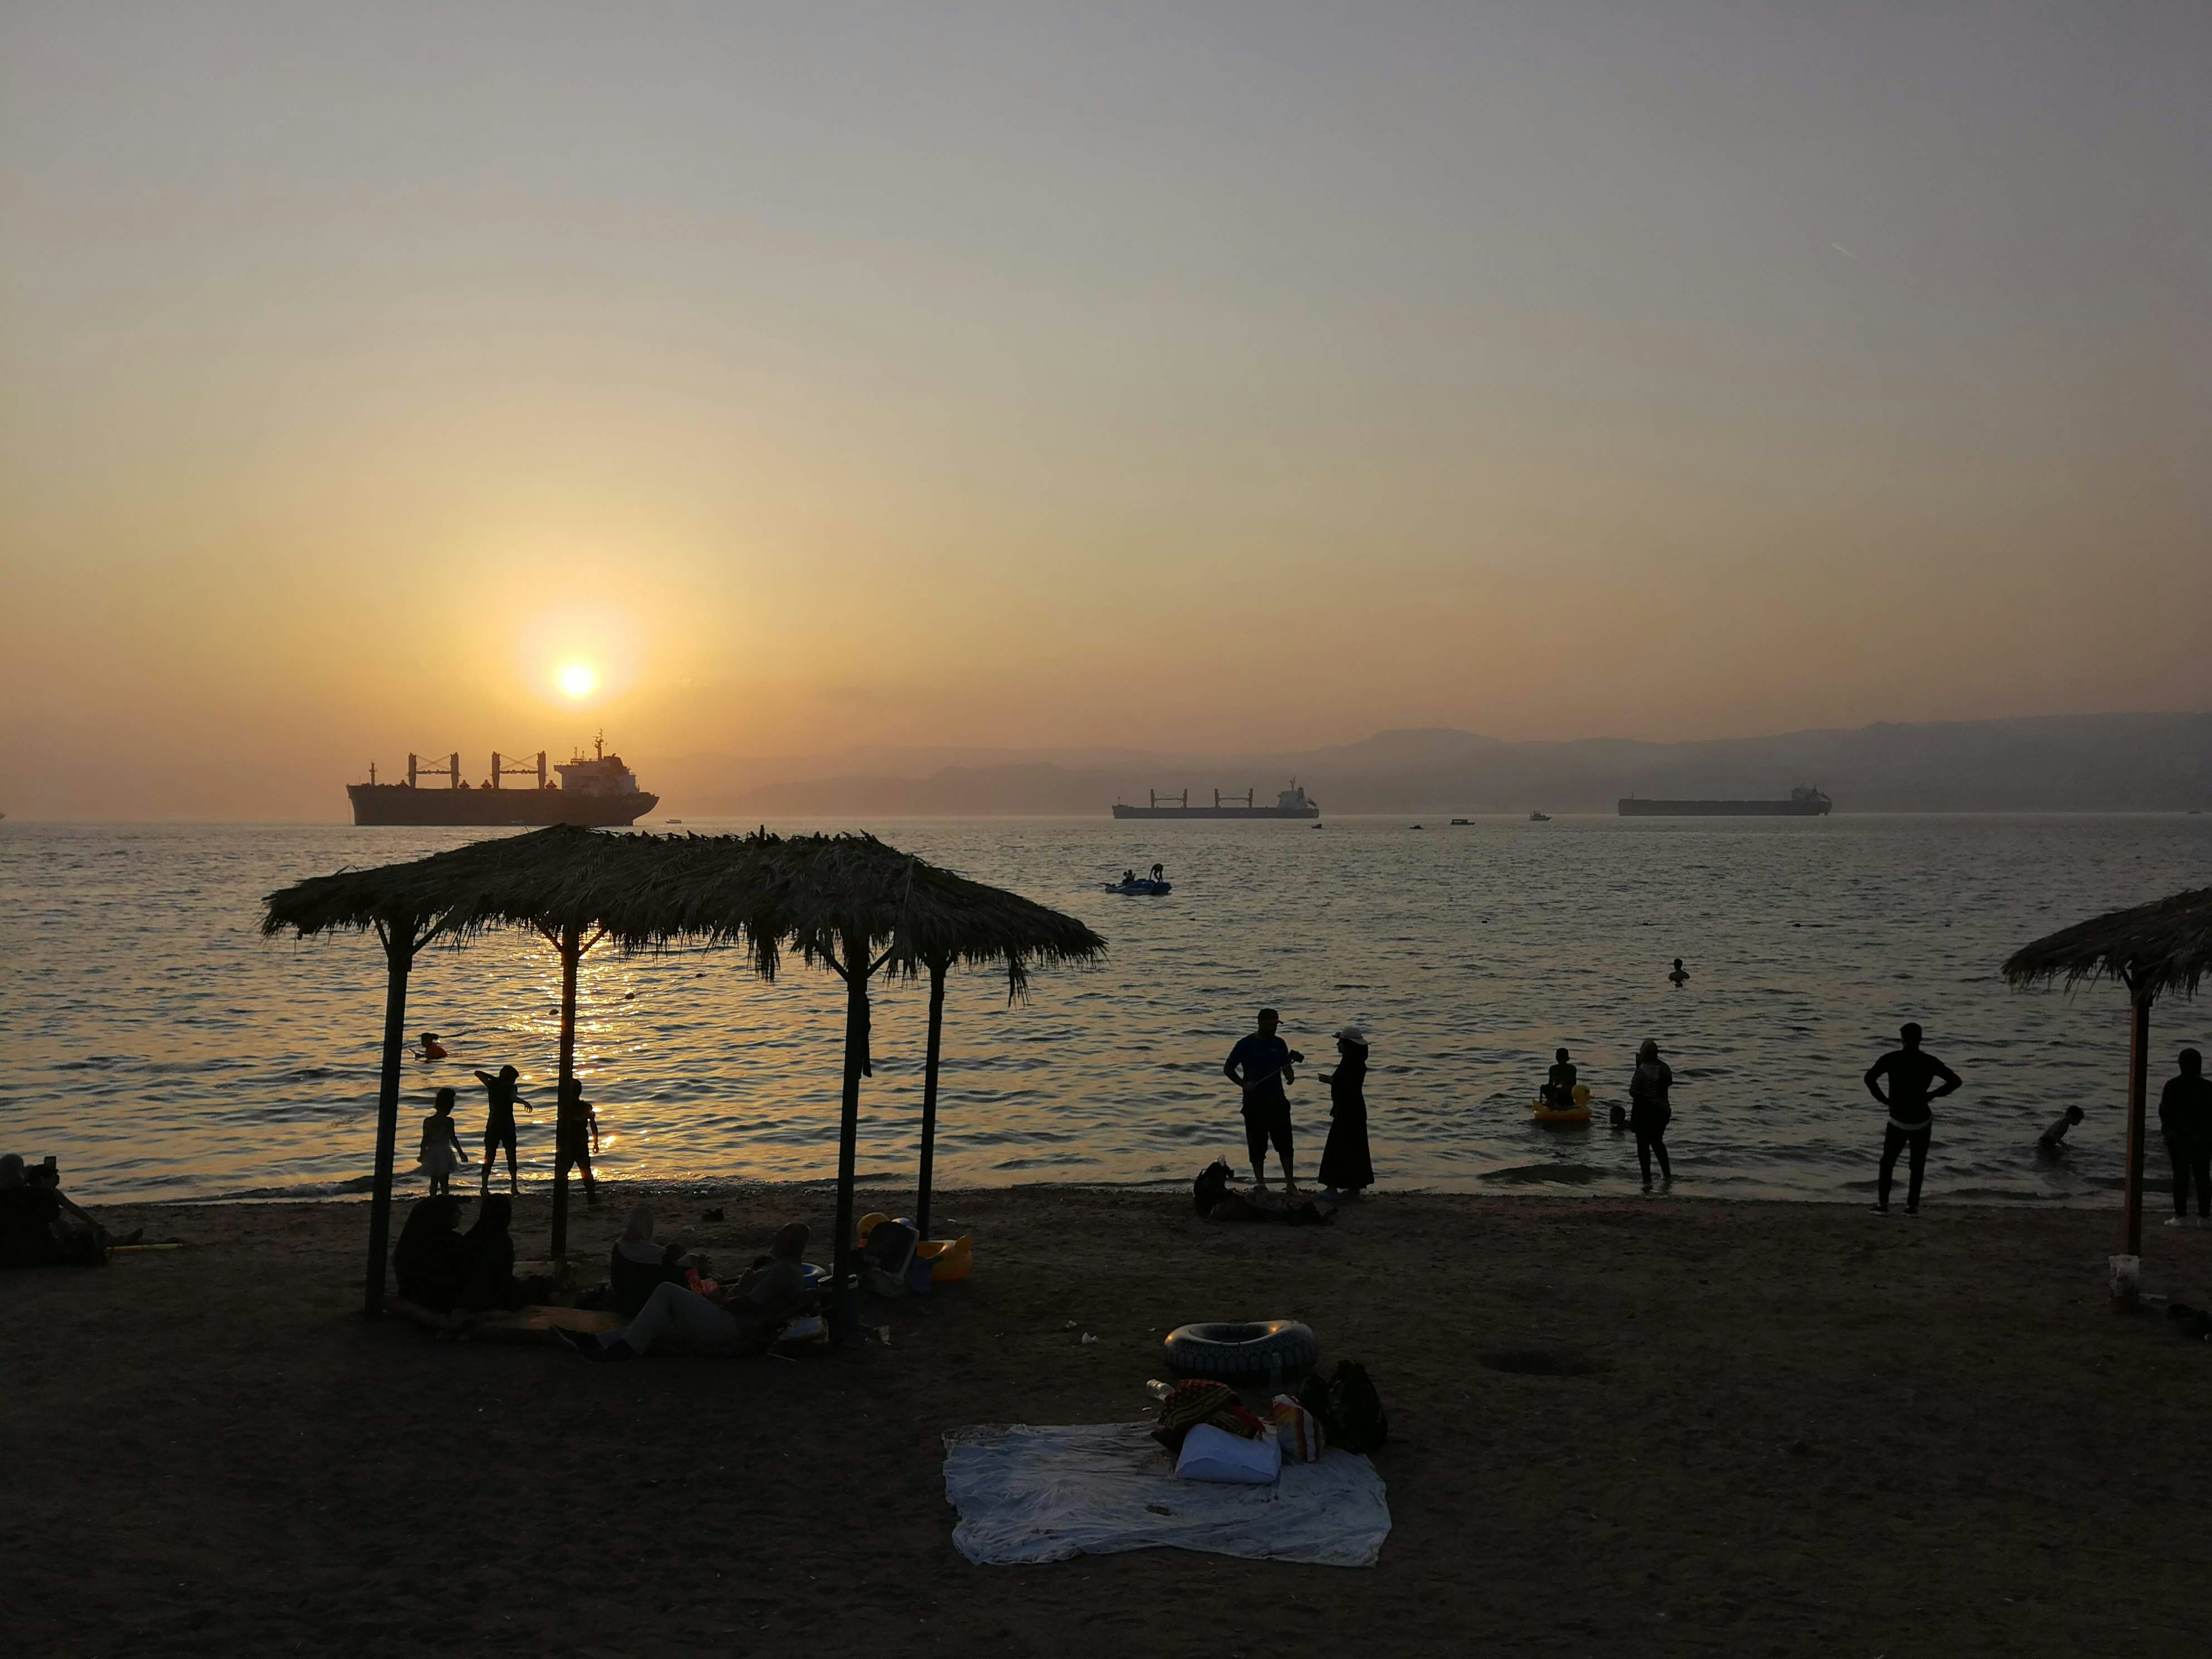 A beach at sunset. In silhouette are children playing in the water, a palm tree shelter and adults standing on the shore. A ship is on the water.